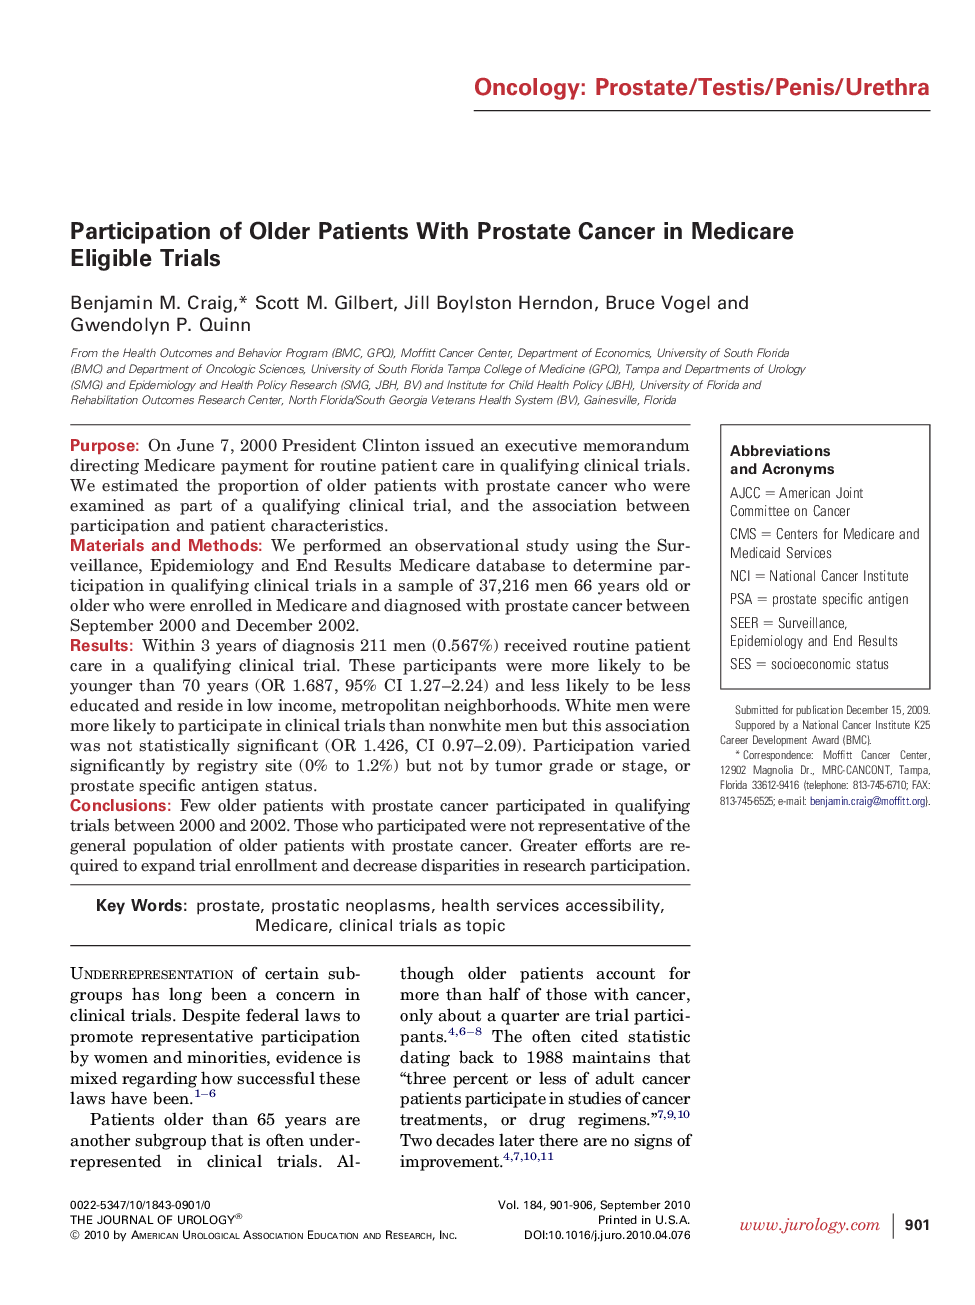 Participation of Older Patients With Prostate Cancer in Medicare Eligible Trials 